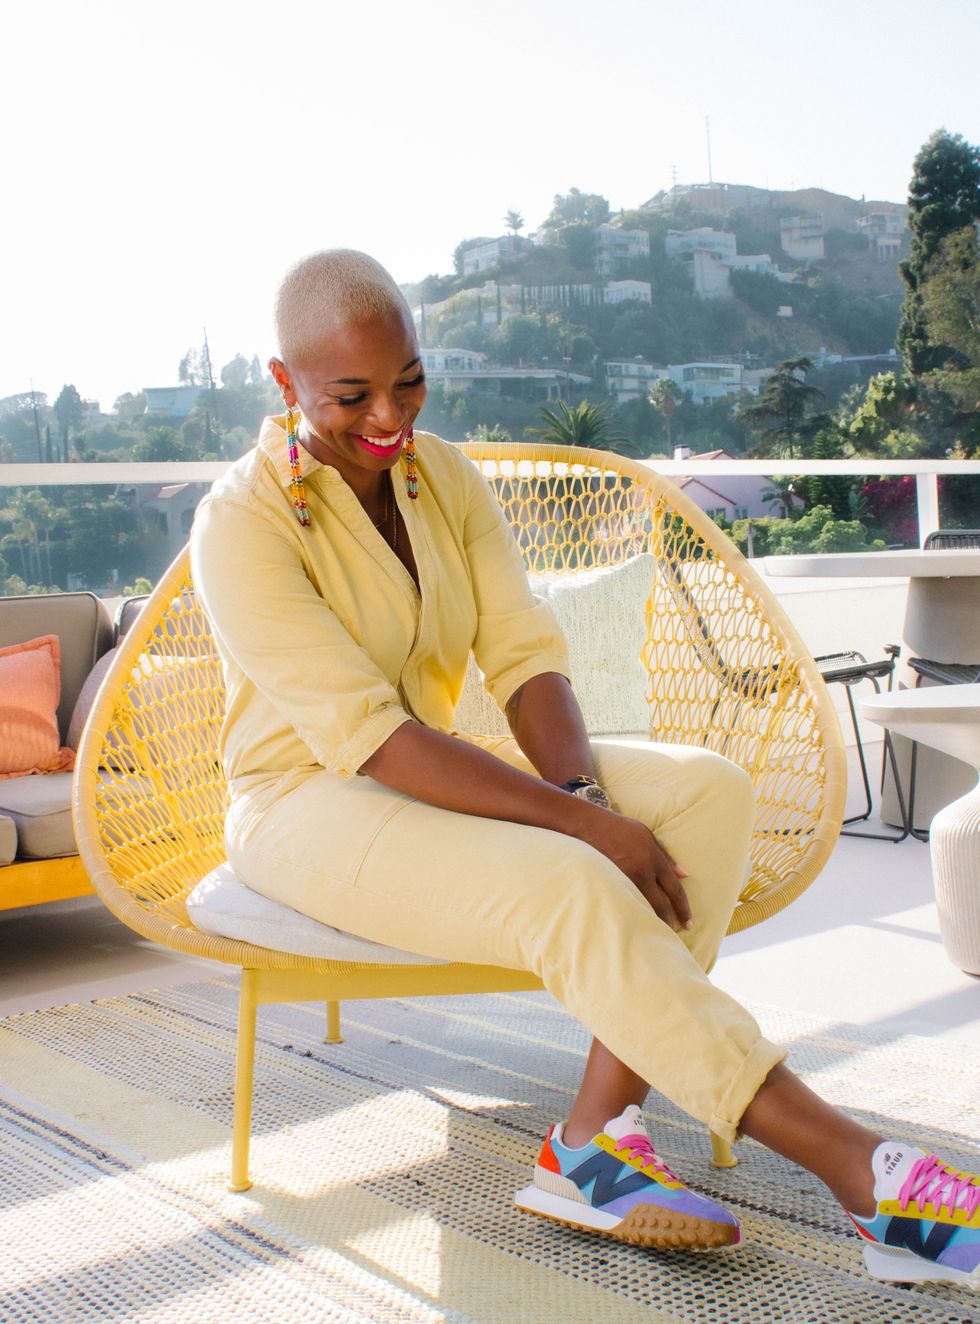 crystal vinisse thomas sitting on a yellow chair